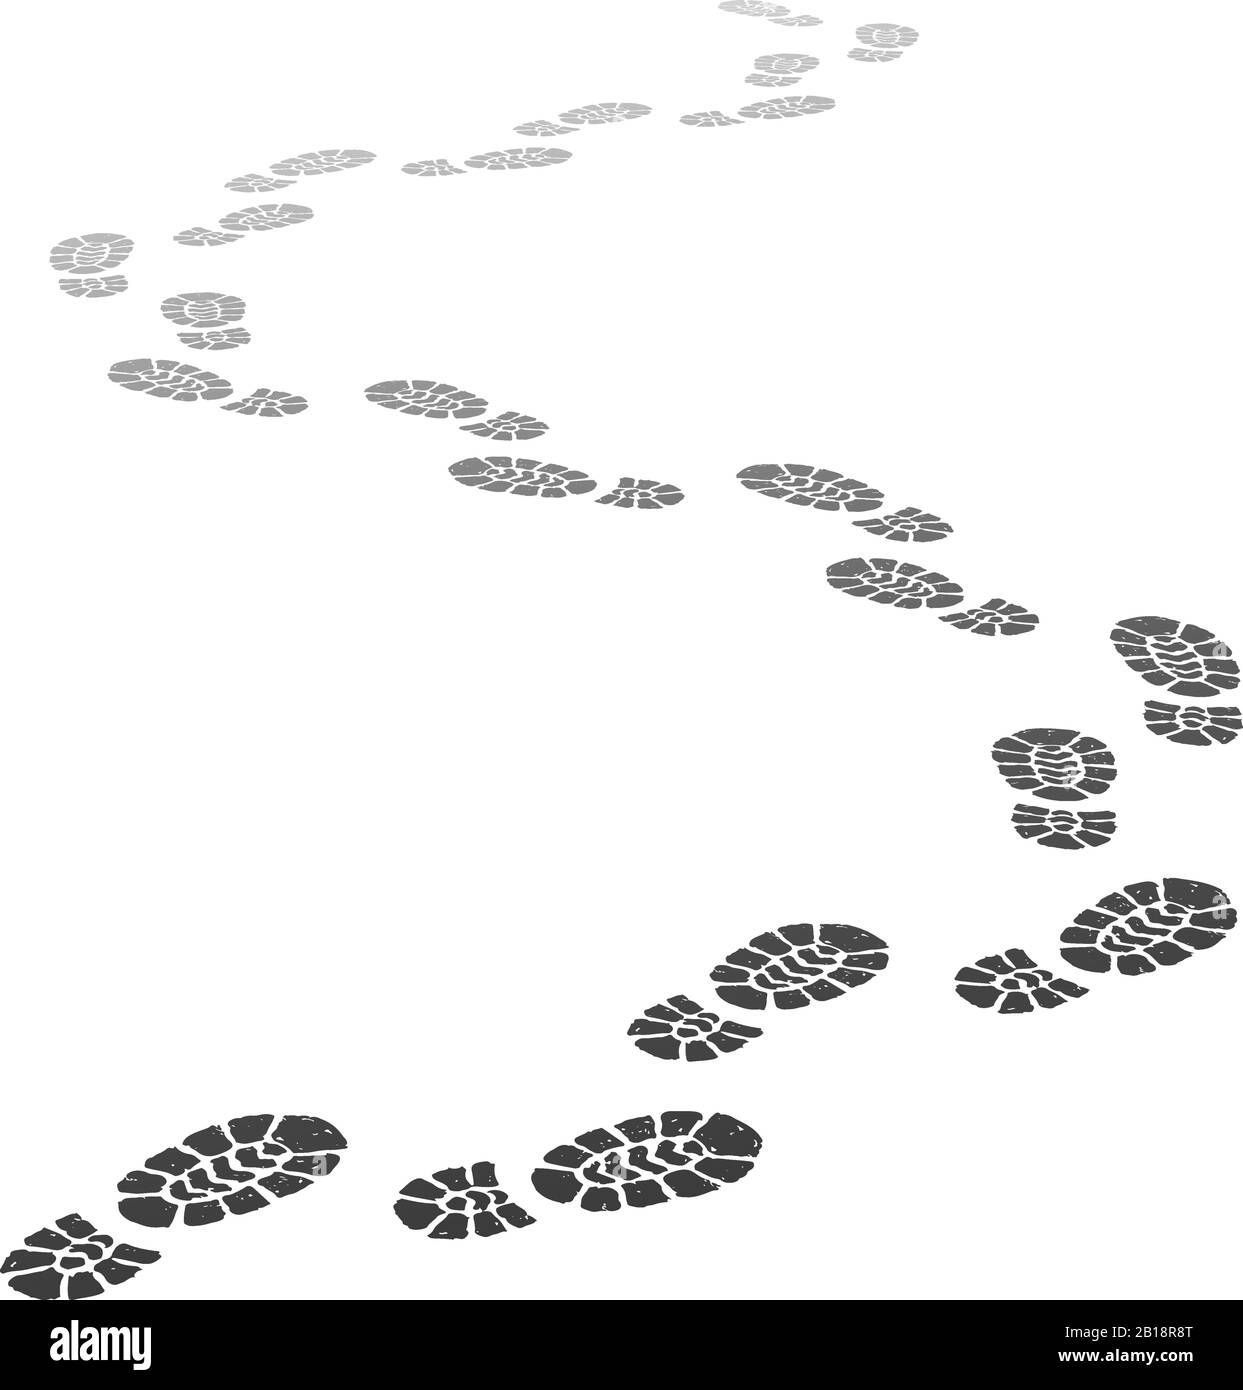 Walking Away Footsteps Outgoing Footprint Silhouette Footstep Prints